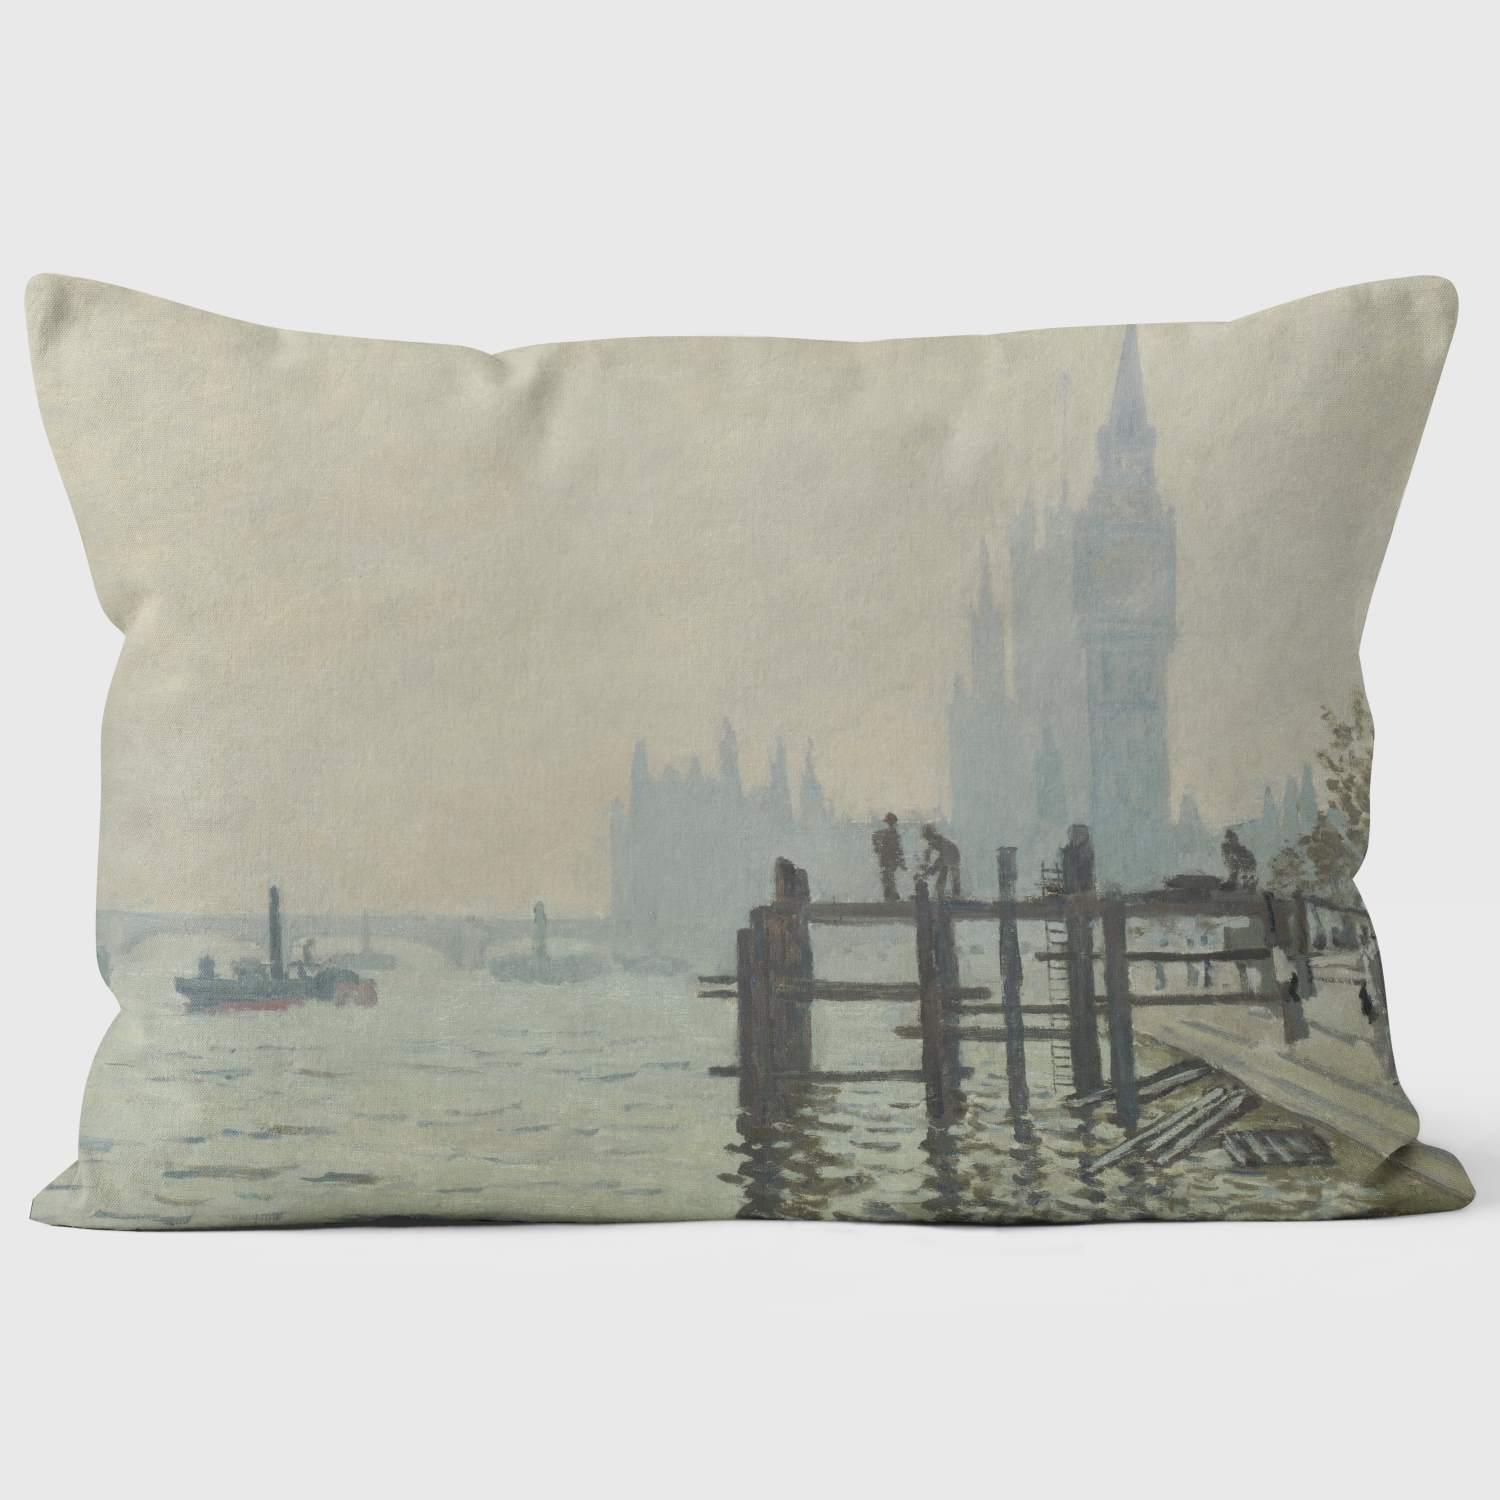 The Thames below Westminster - Claude Monet - National Gallery Cushion - Handmade Cushions UK - WeLoveCushions